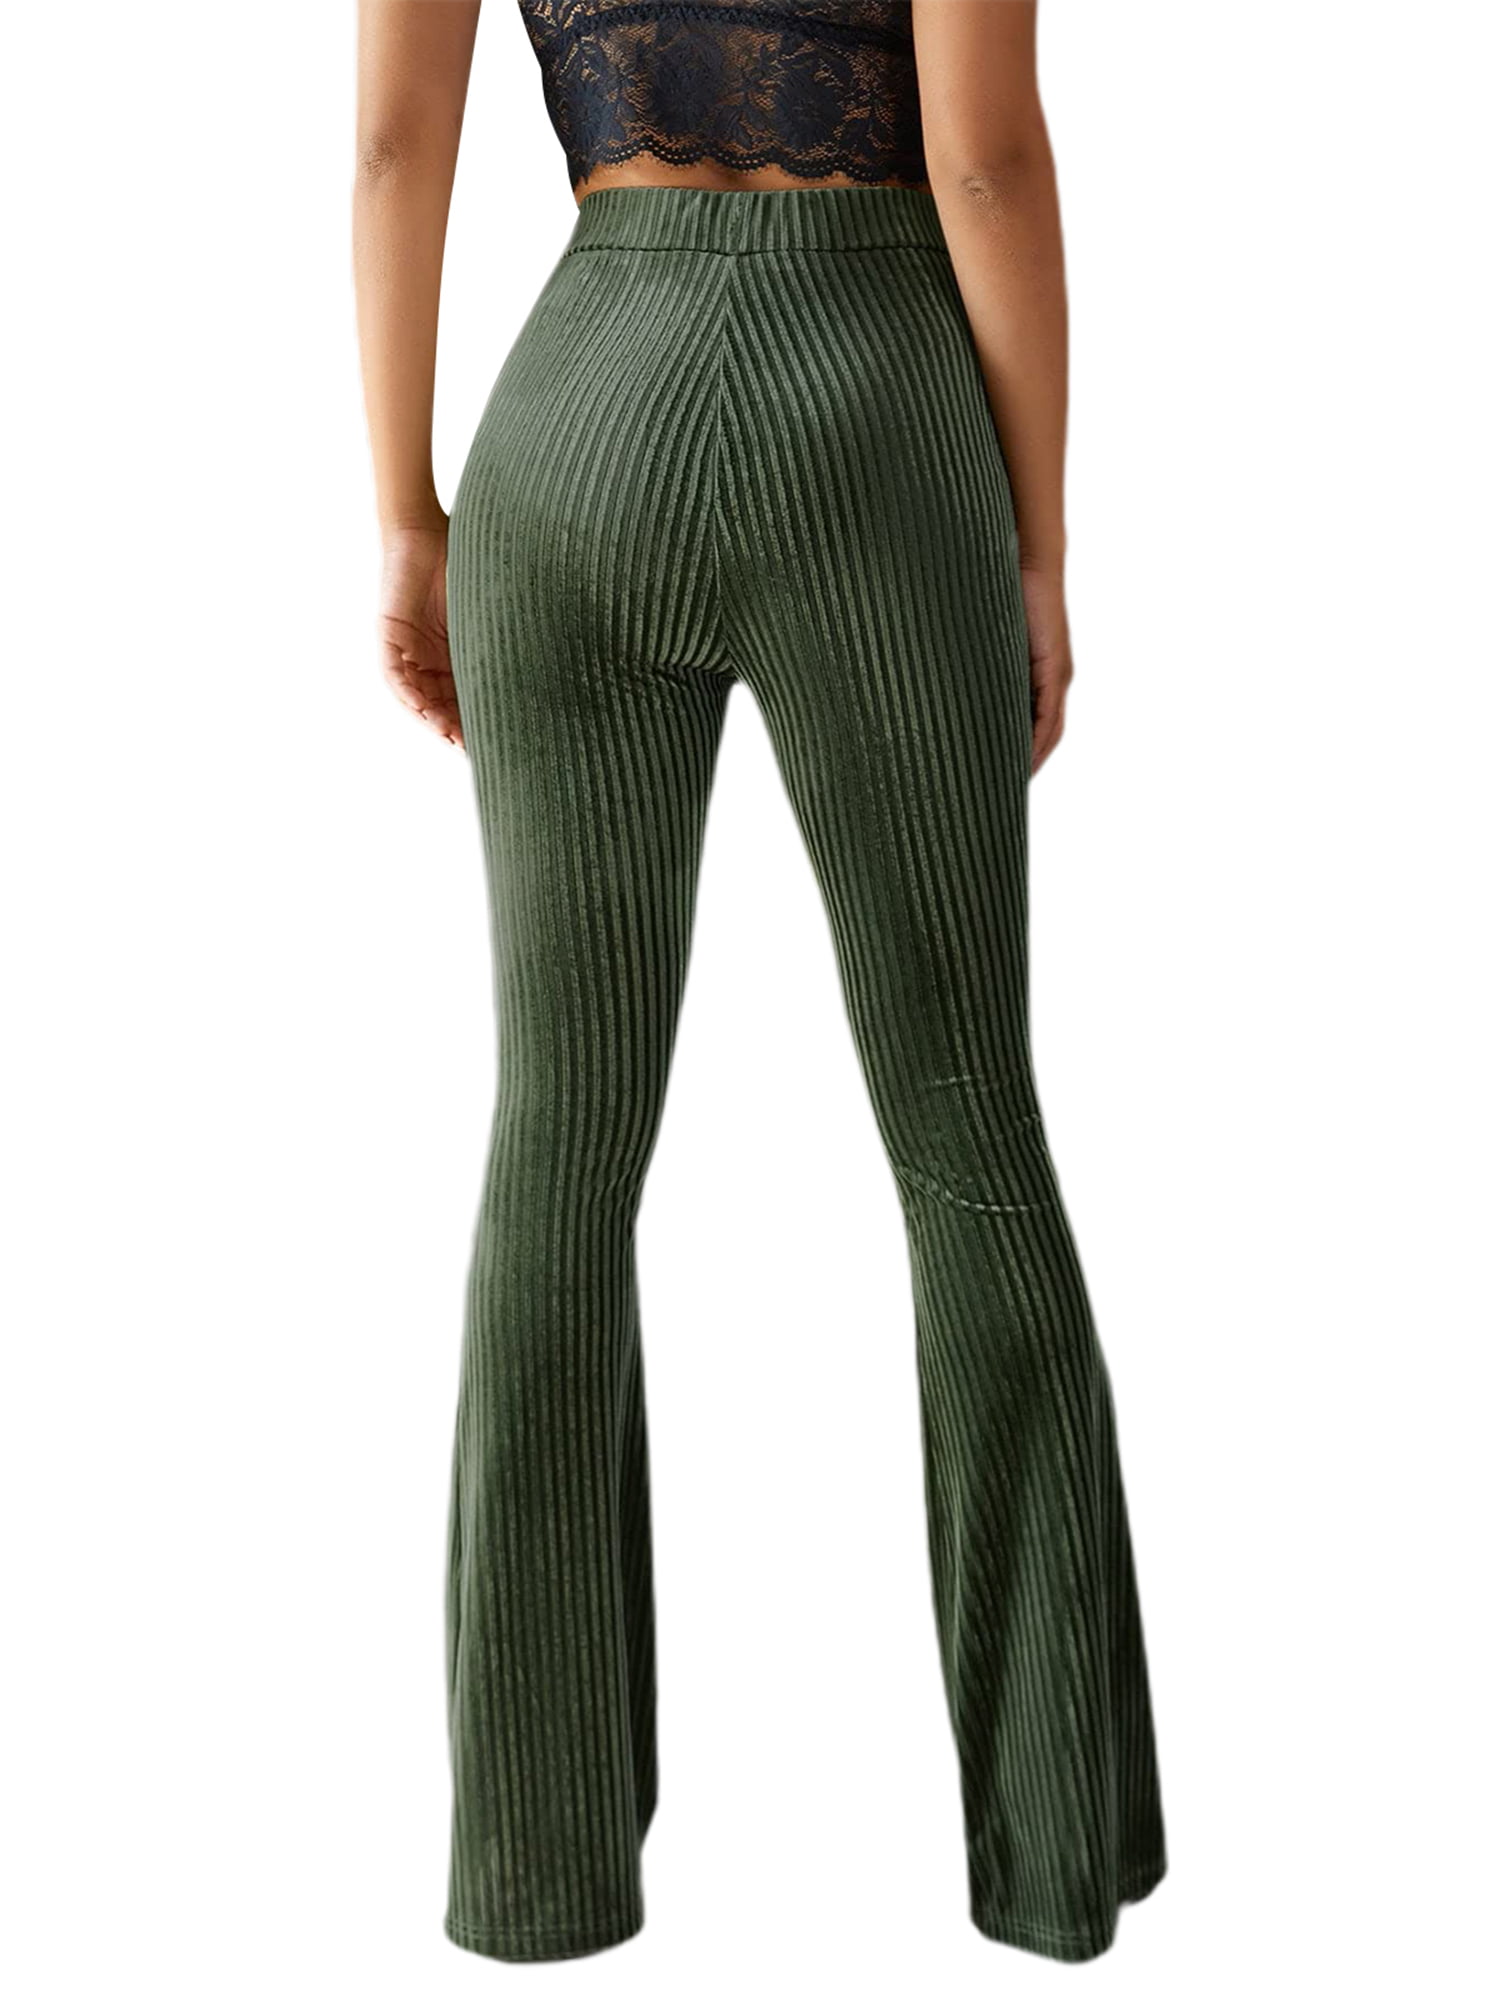 AdoDanep Corduroy Pants Women Plus Size Wide Leg Bell Bottoms Skinny  Bootcut Pants Casual Pull On Trousers Yoga, Green, Small : :  Clothing, Shoes & Accessories